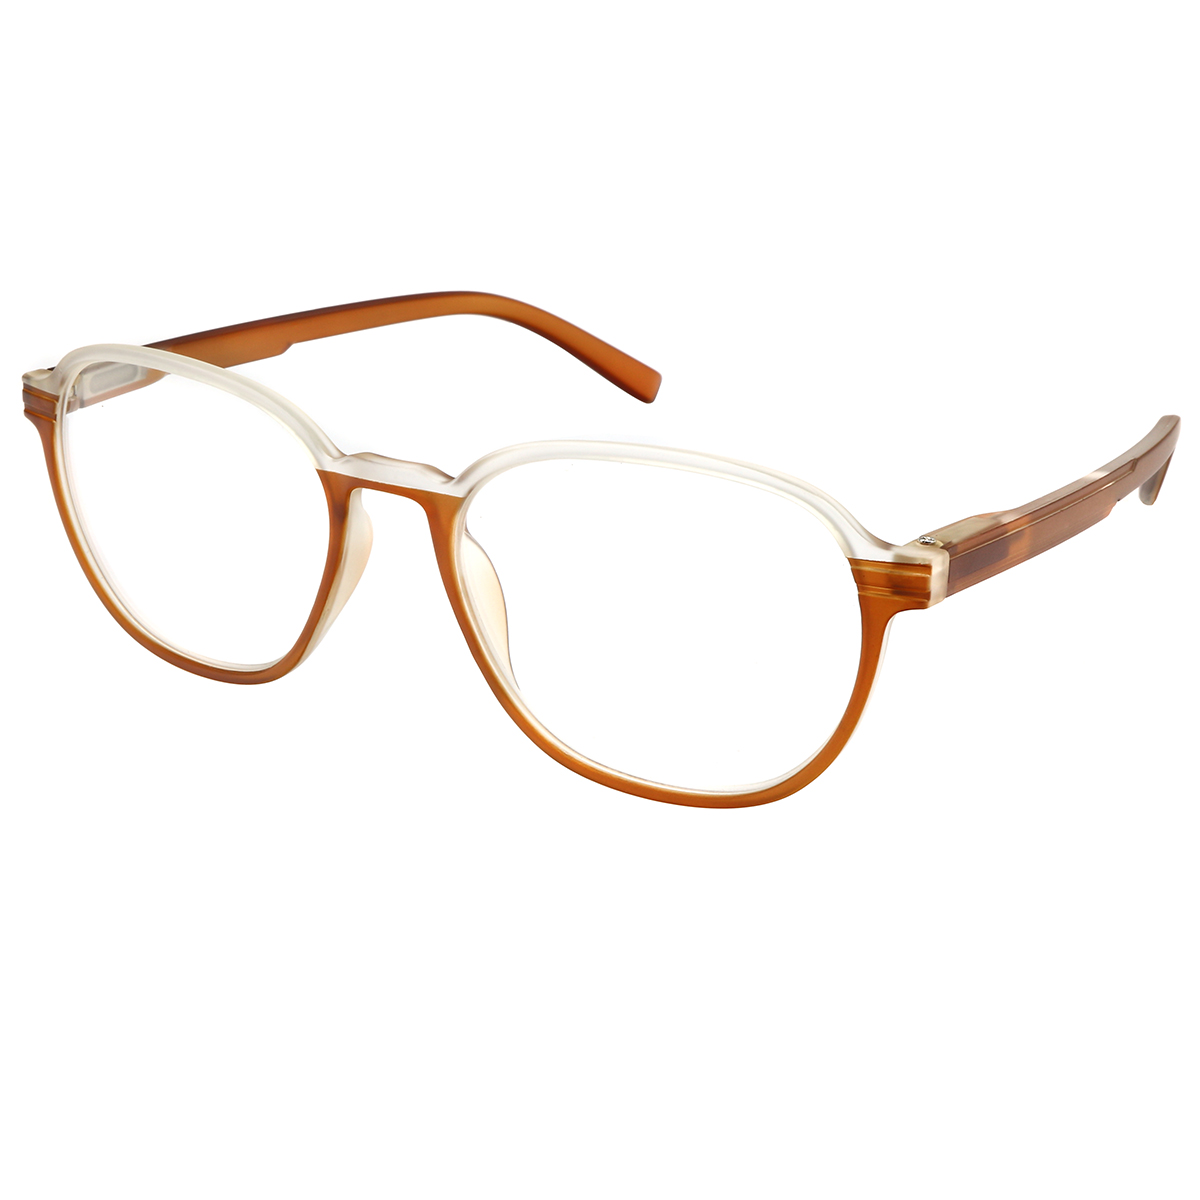 Prism - Round Brown Reading Glasses for Men & Women